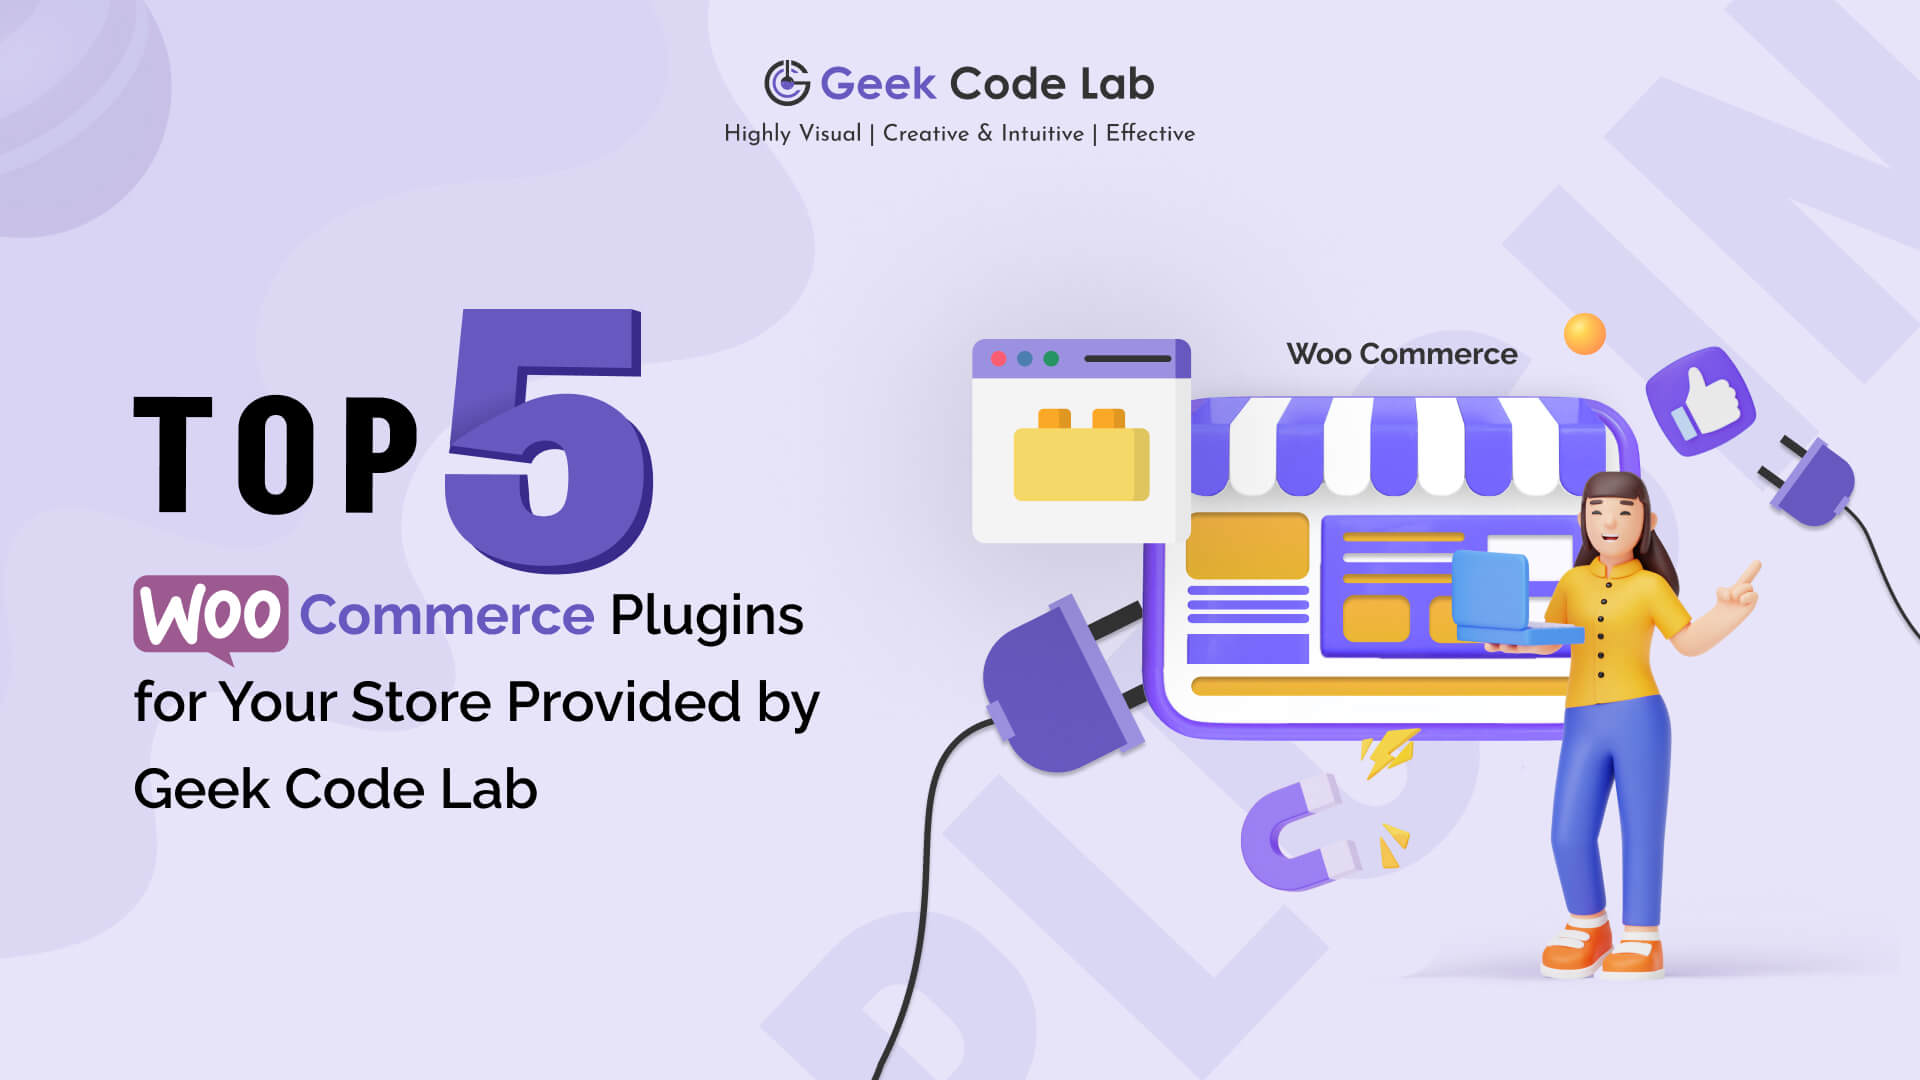 Top 5 WooCommerce Plugins for Your Store Provided by Geek Code Lab